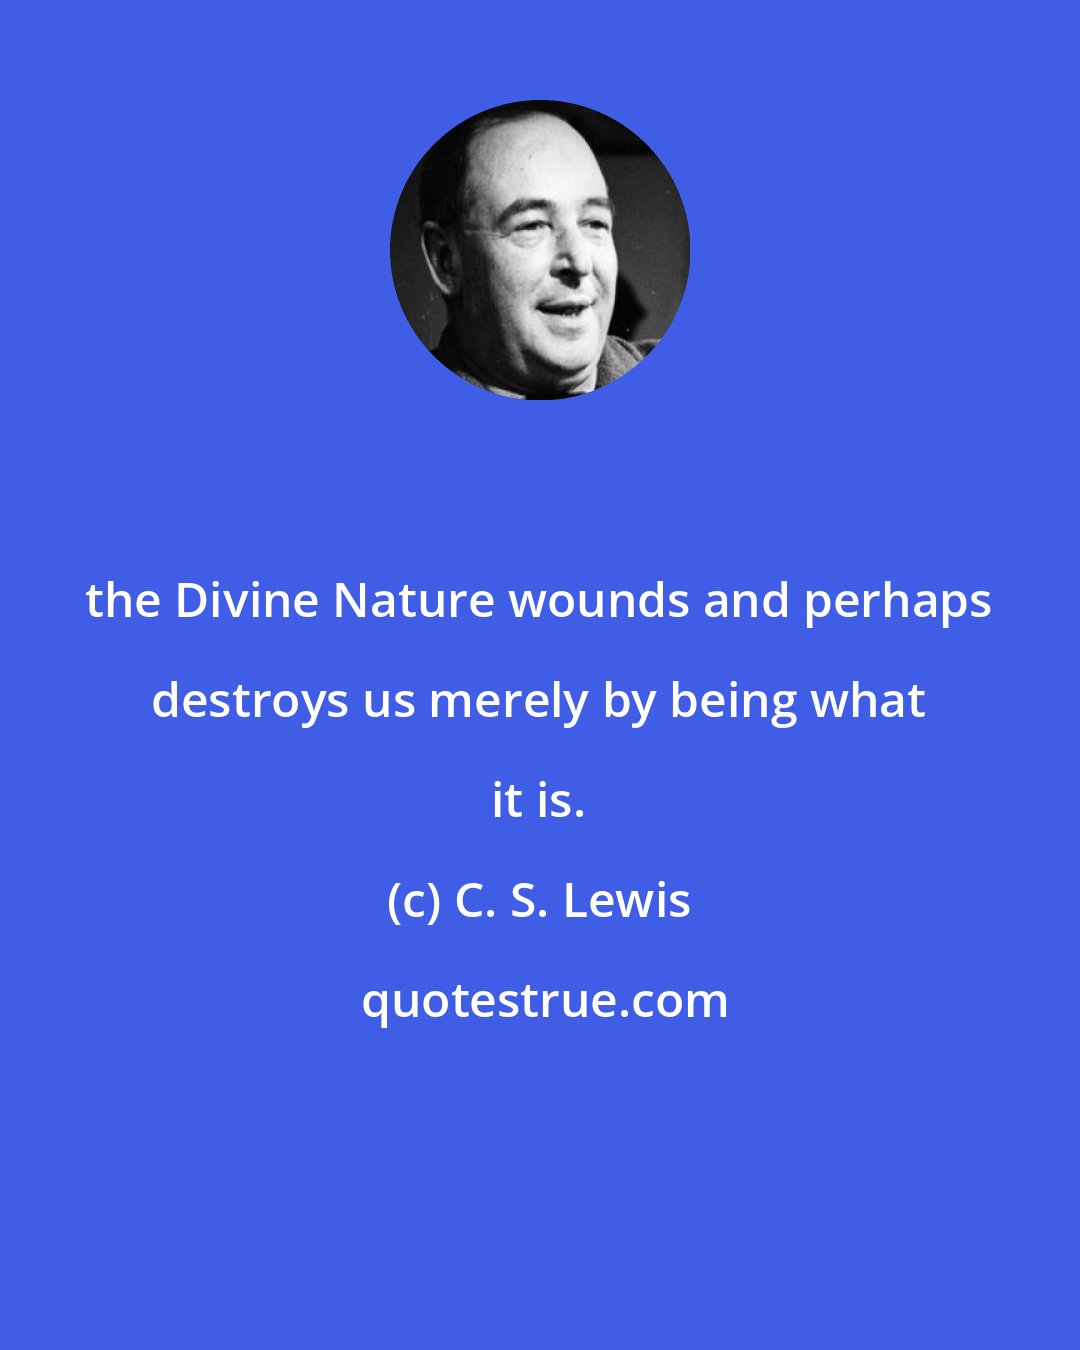 C. S. Lewis: the Divine Nature wounds and perhaps destroys us merely by being what it is.